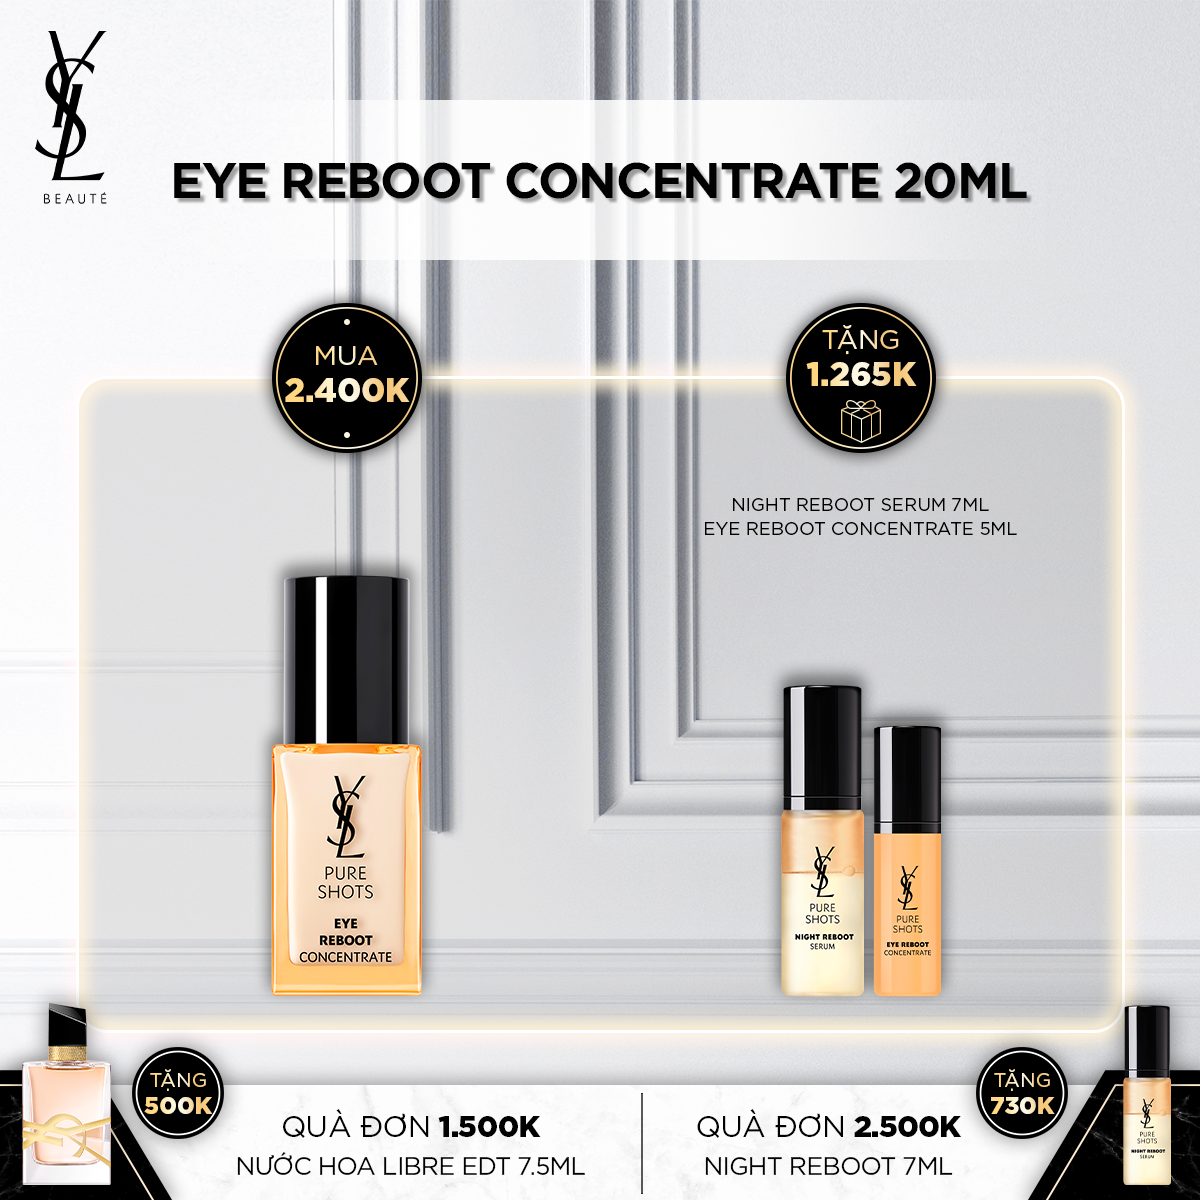 Tinh Chất Pure Shots Eye Reboot Concentrate 20ml